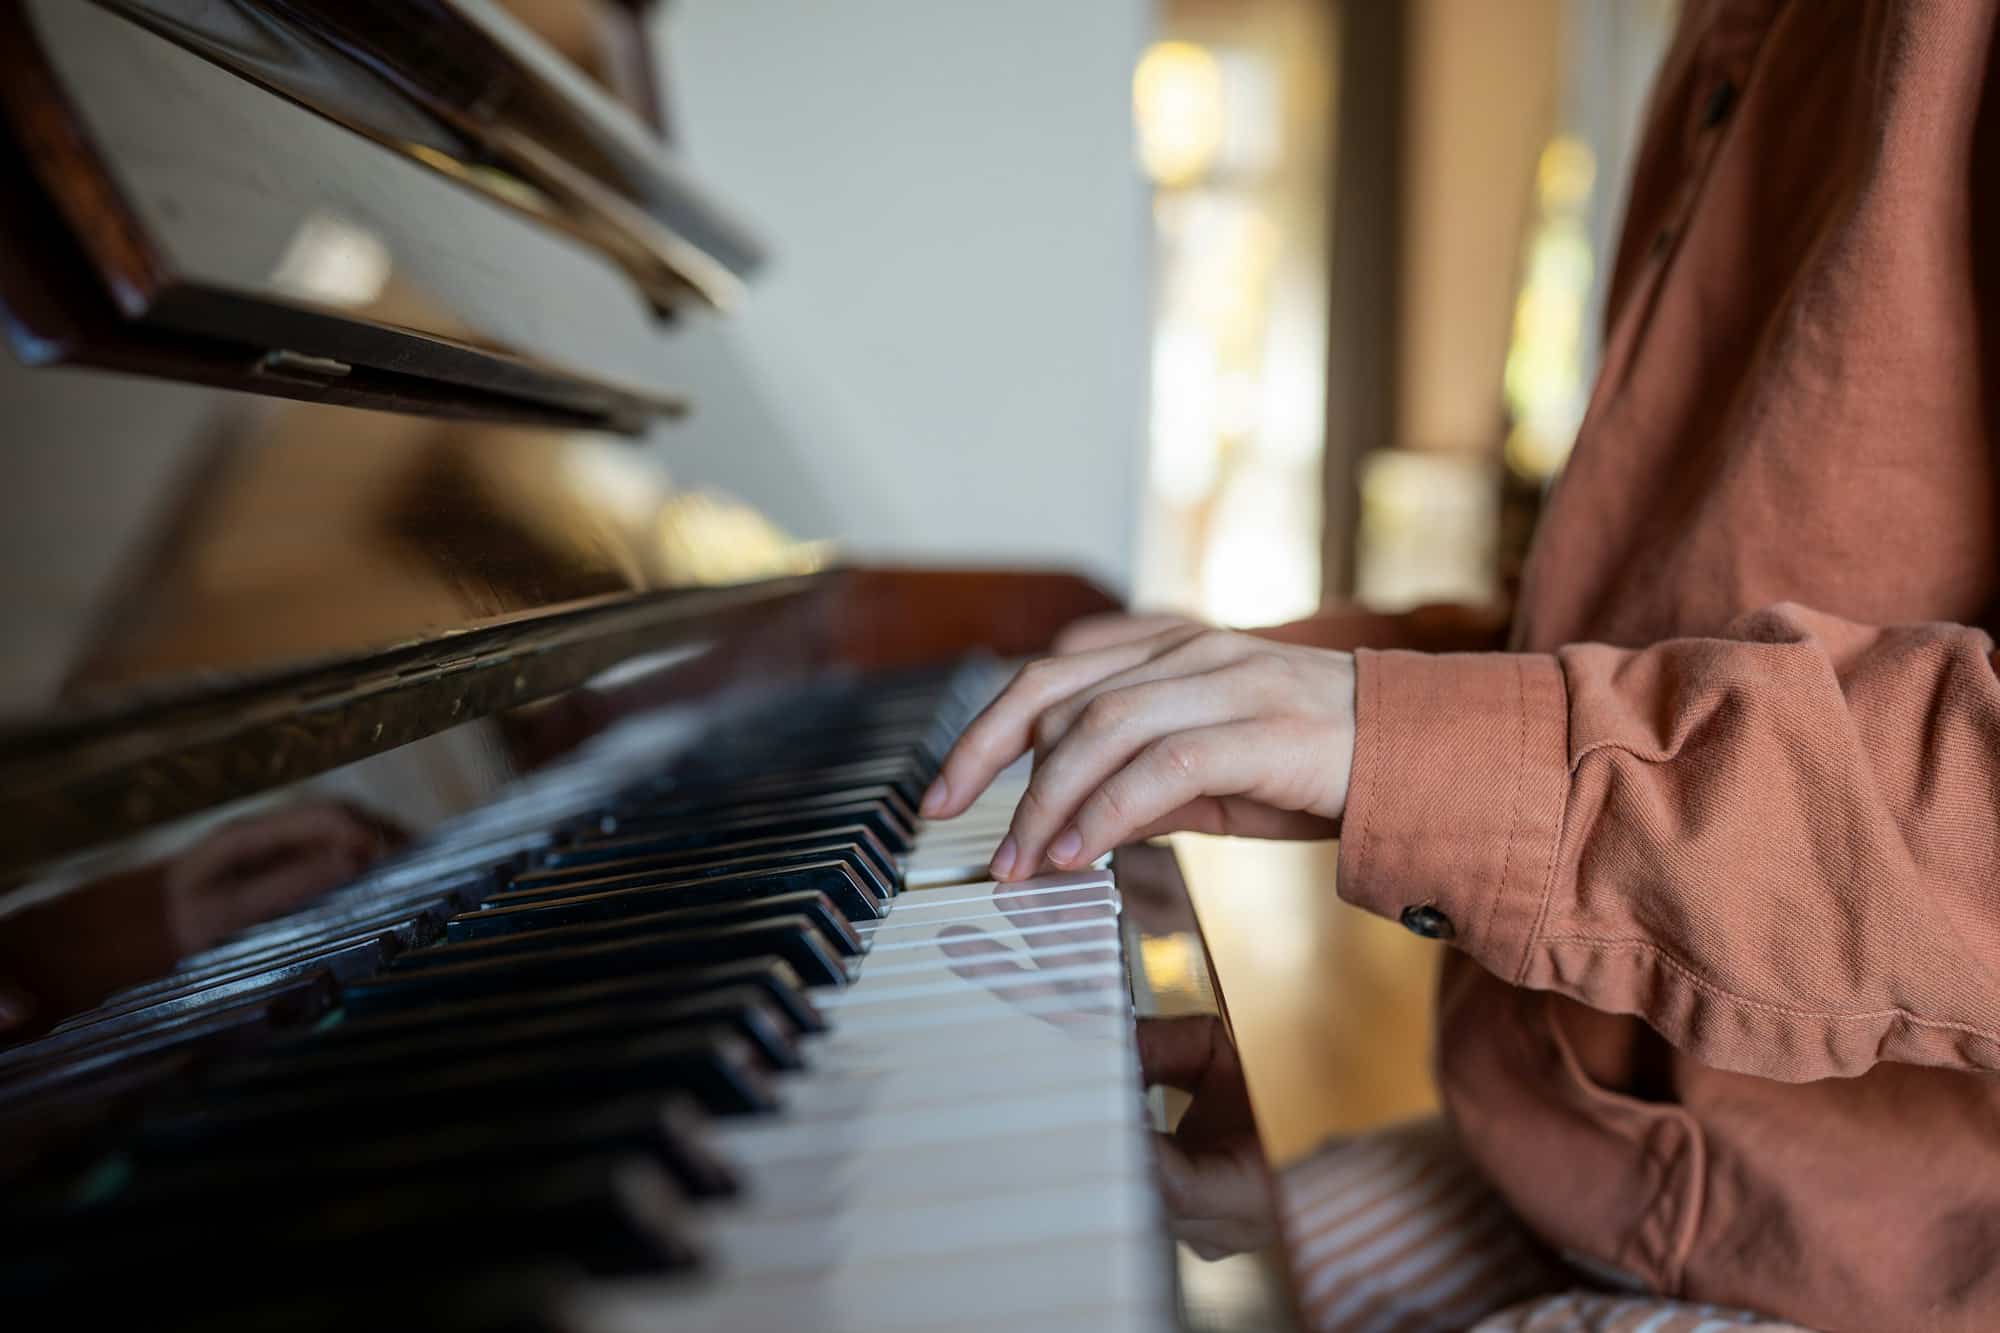 Hands of woman talented pianist practicing music skills playing piano at home enjoying melody.